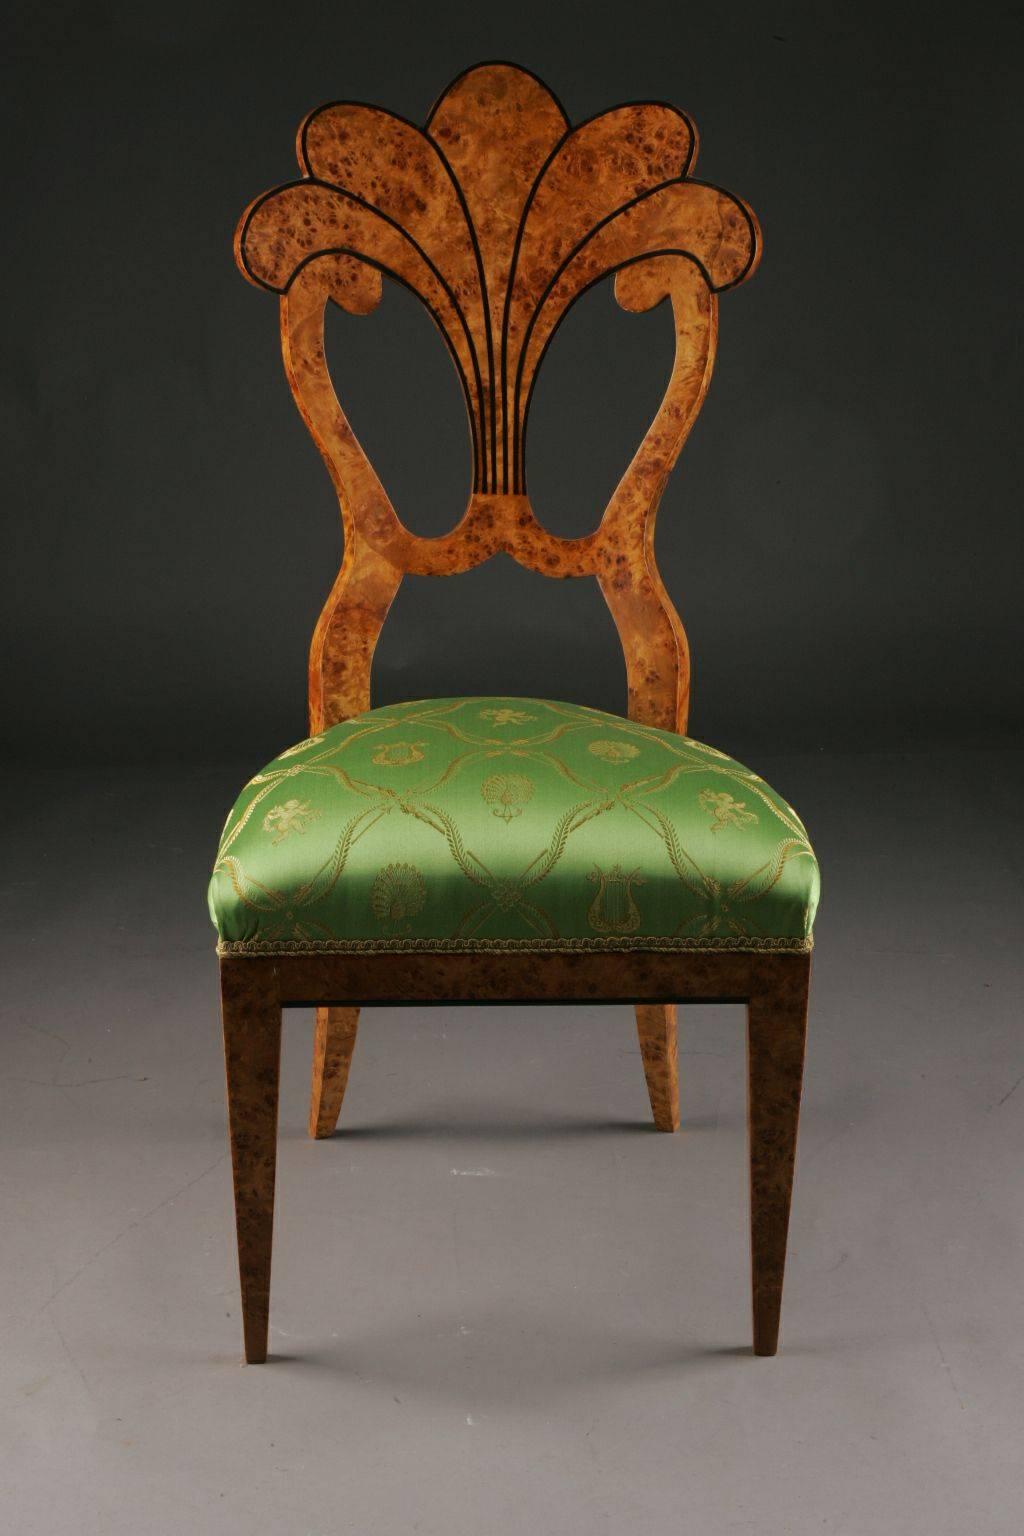 Vienna Biedermeier chair in form of a fan after J. Danhauser, 1805-1845.
Solid Beechwood with maple root veneer. Filament intarsia and slightly curved, fan-formed backrest.

(C-Sam-16).